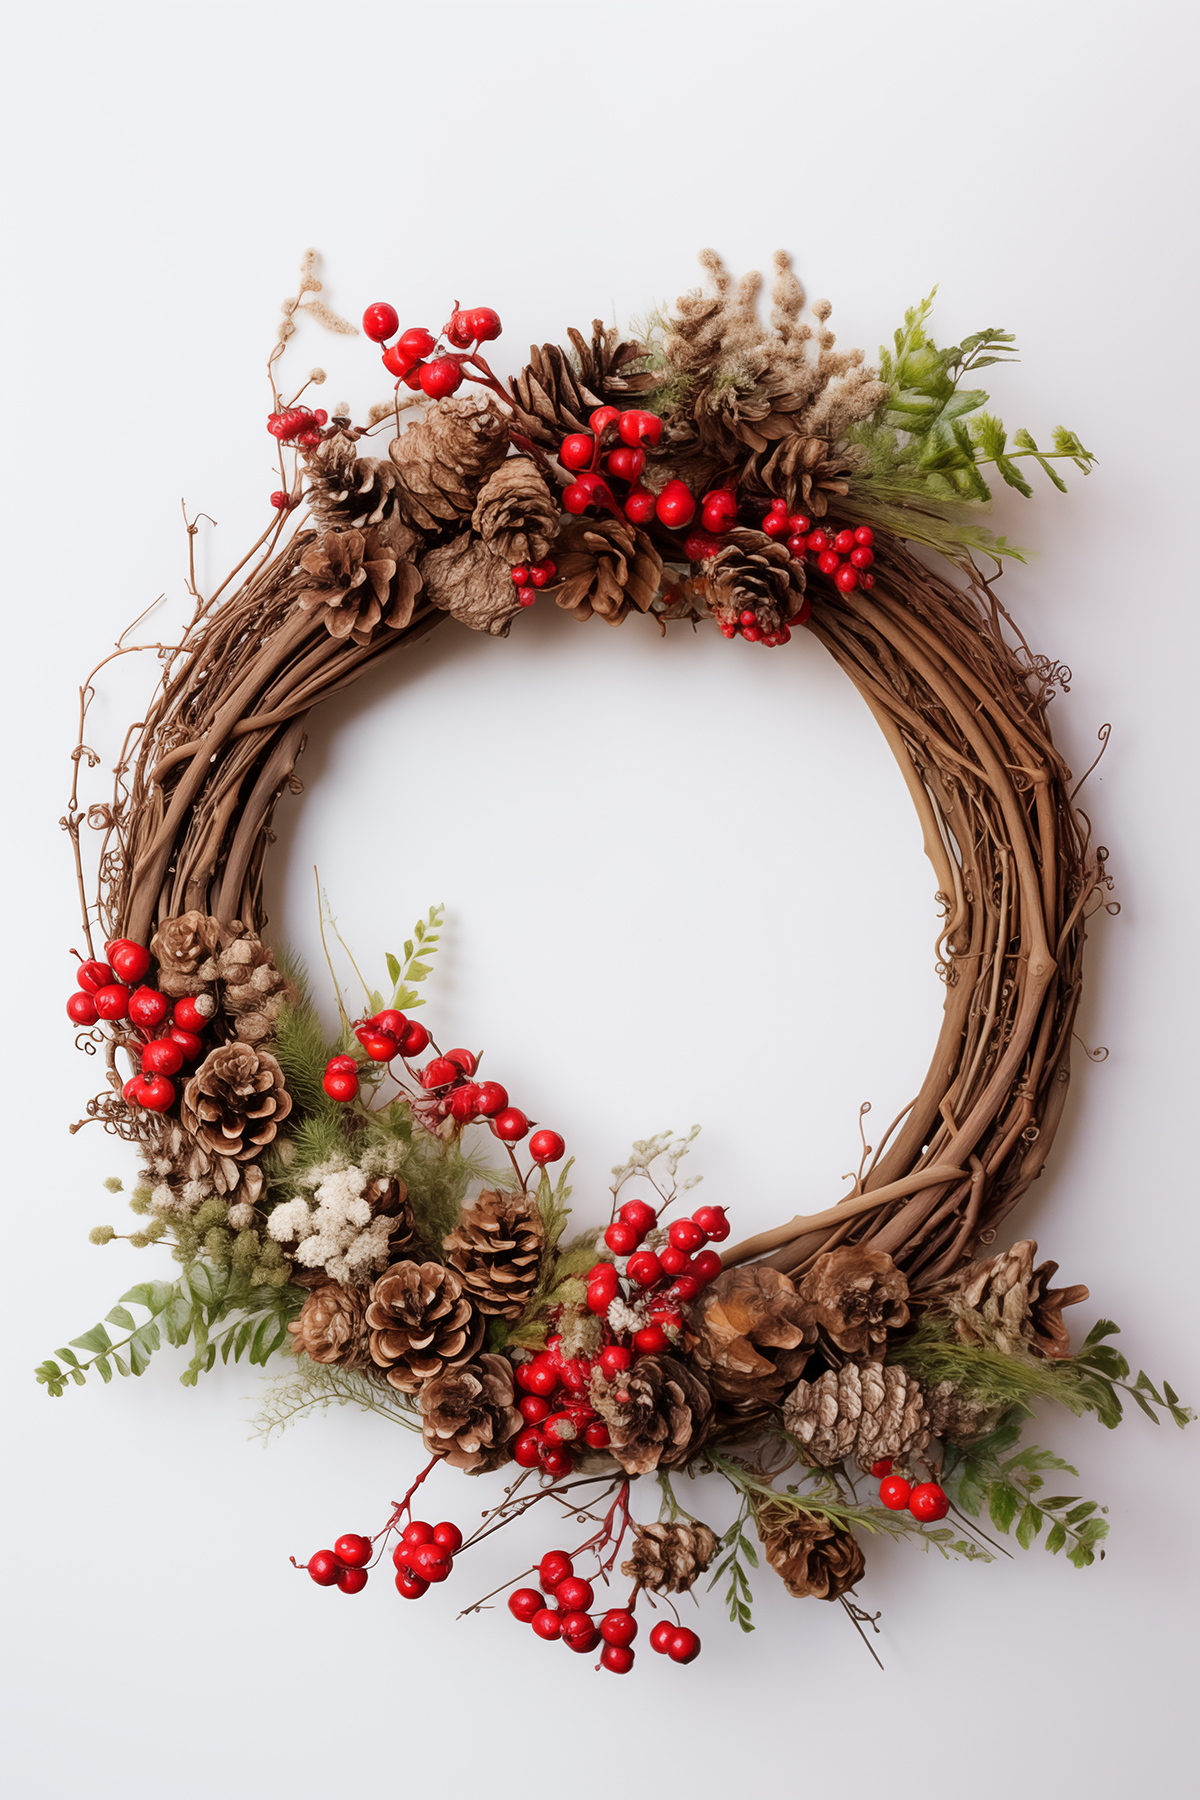 Grapevine wreath with pinecones, ferns and berries for a woodland look.